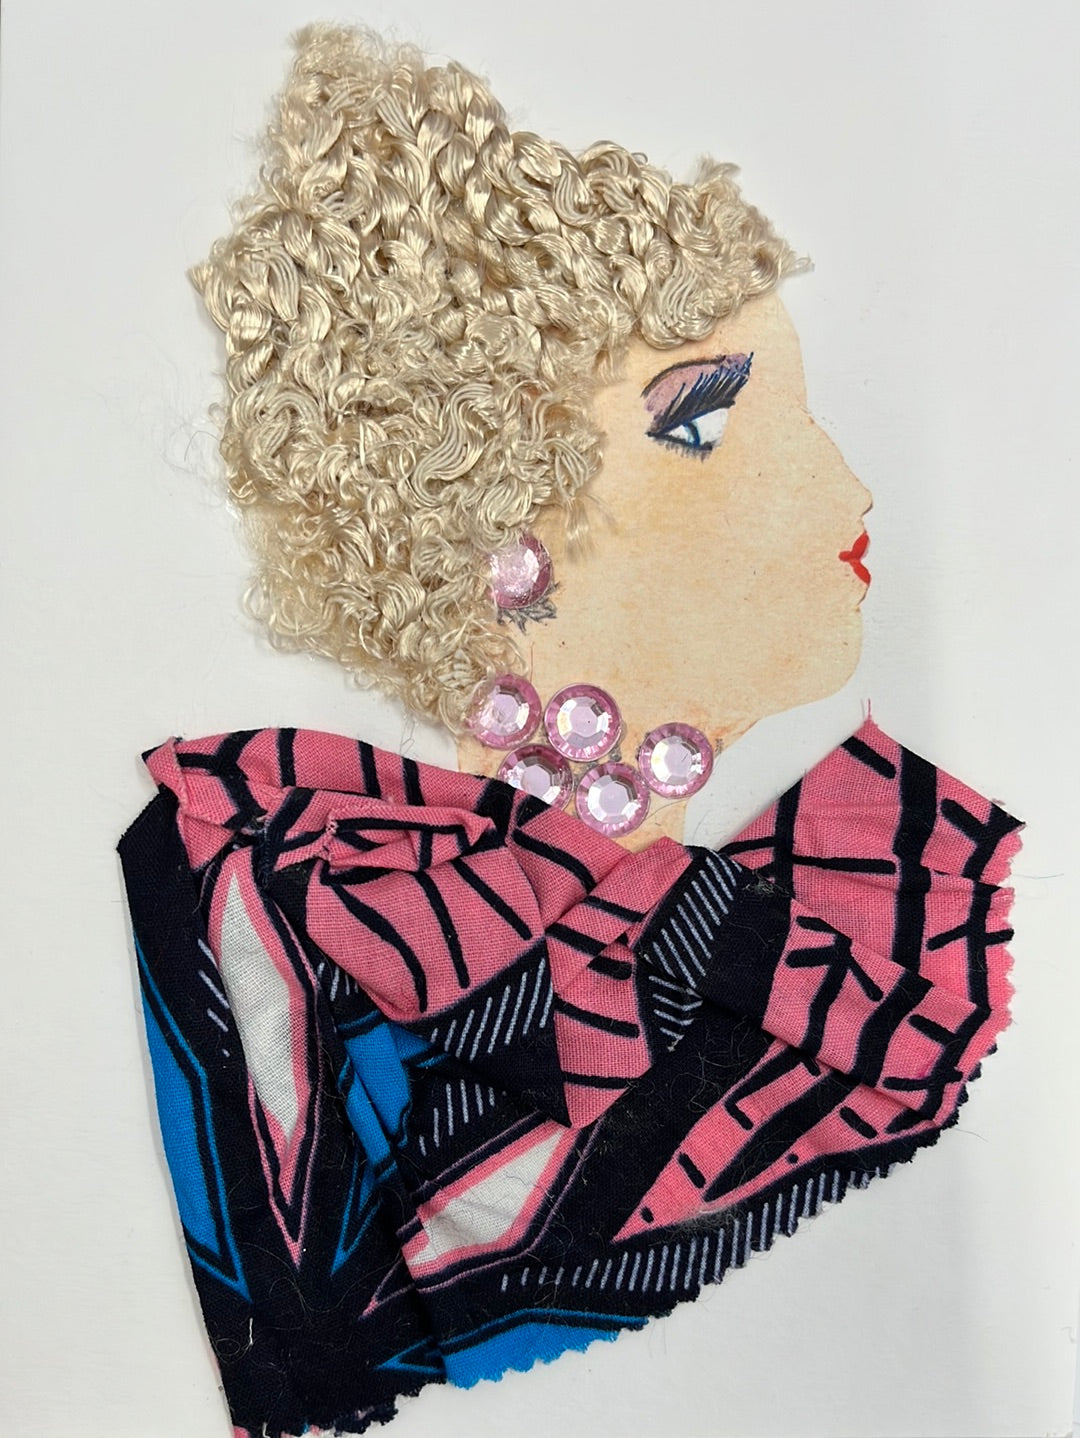 This card has been given the name Wilma Waterloo. Wilma wears a predominantly pink patterned blouse with black and sky blue accents. Her necklace and earrings are made of pink gems, and she has short, curly, blonde hair.